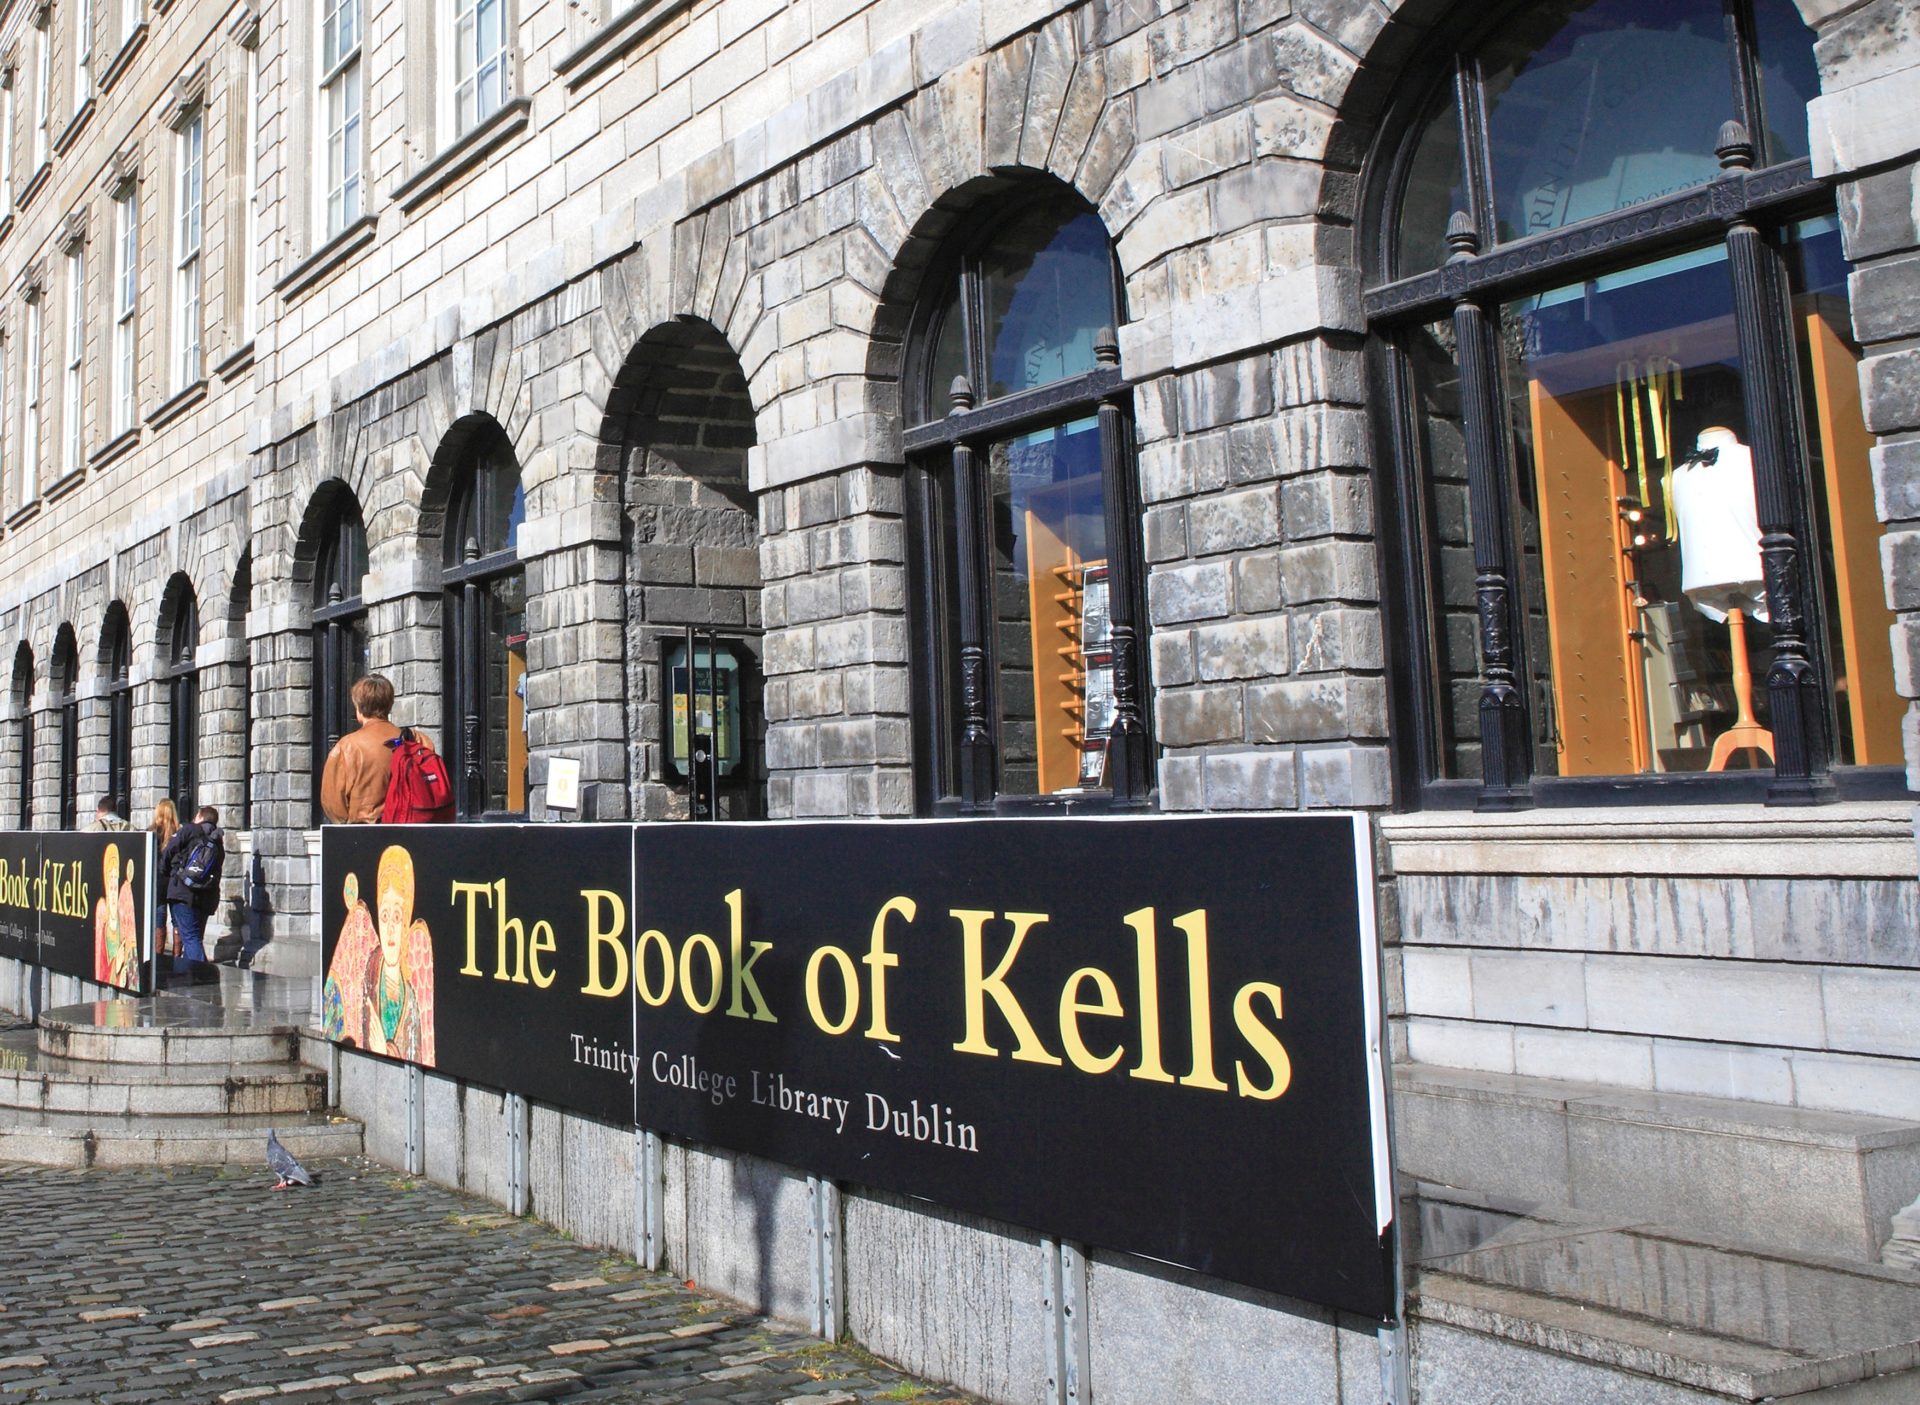 The entrance to the Book Of Kells at Trinity College Dublin in 2007. Image: Pictures Colour Library / Alamy Stock Photo